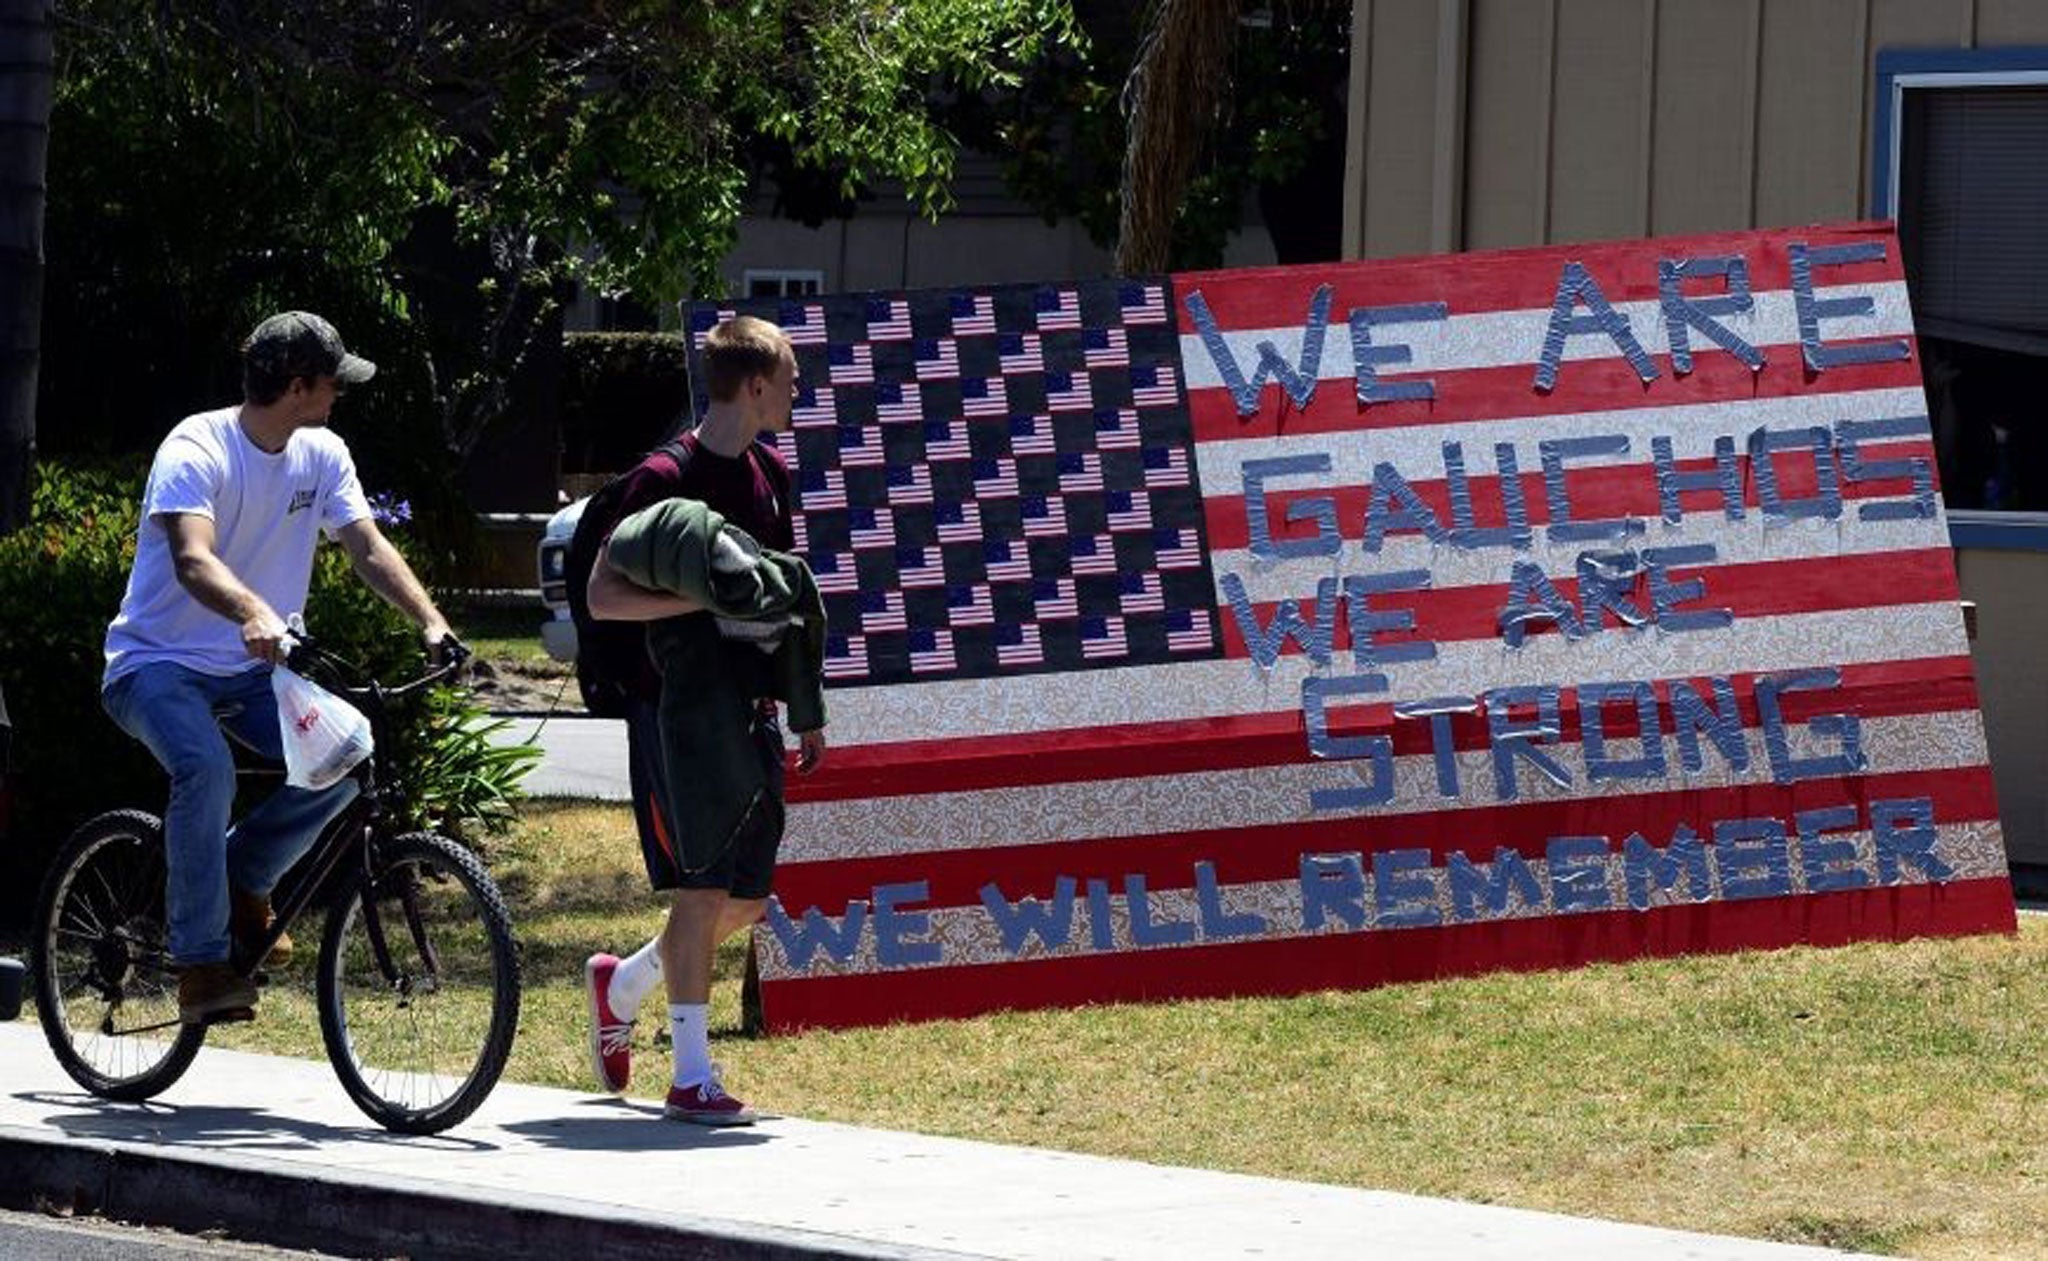 Two students look at a sign that reads "We are Gauchos, We are Strong, We will Remember" set up outside an apartment in the college town of Isla Vista, California